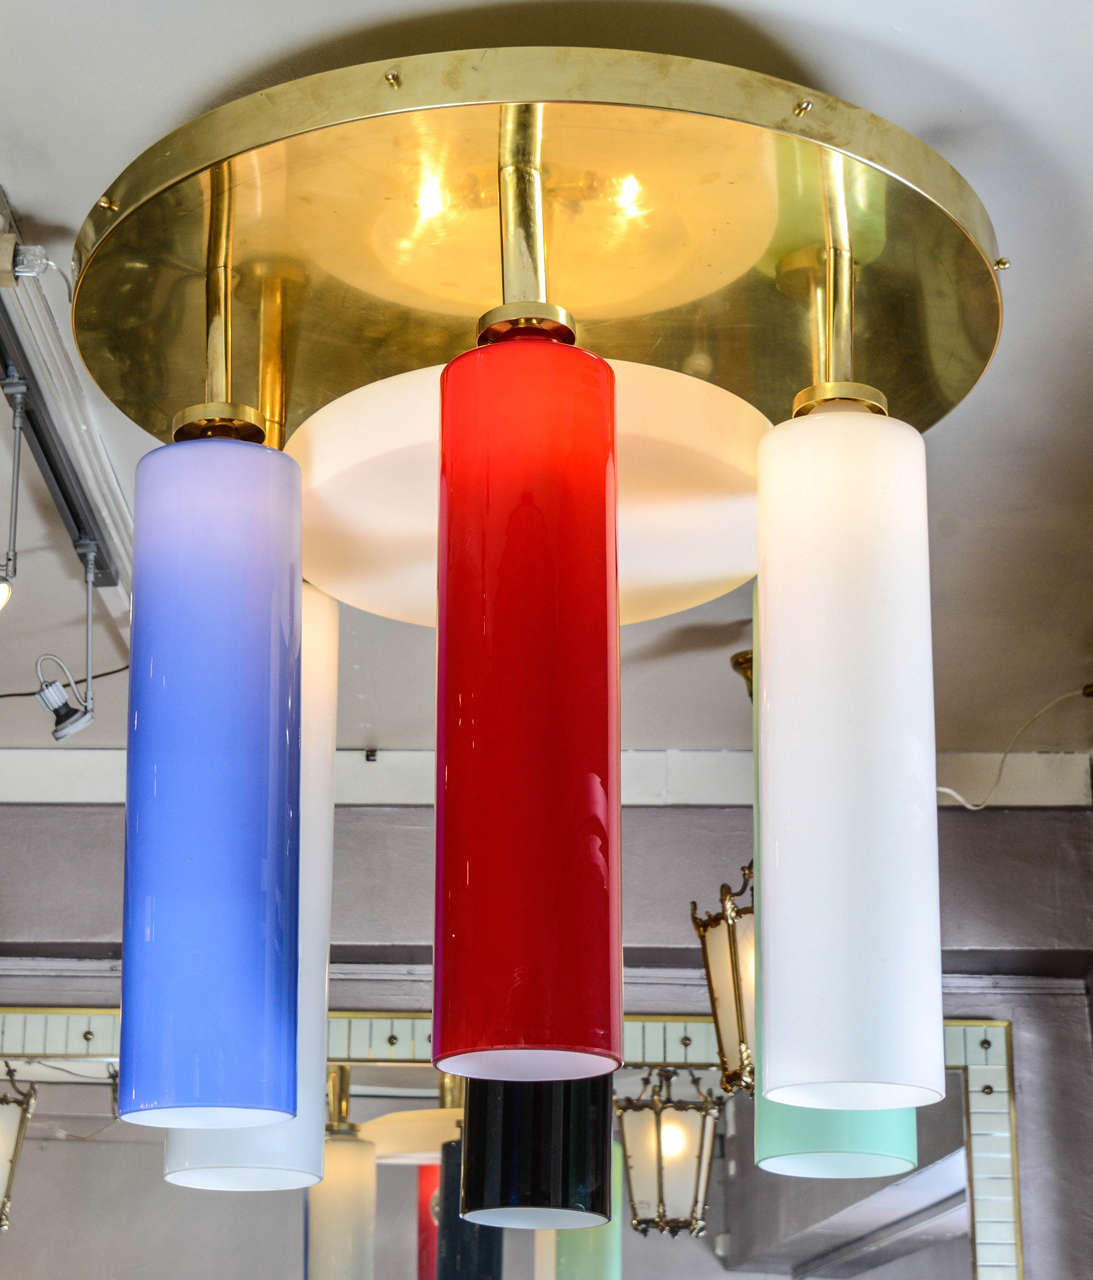 Chandelier with six colored tubes in Murano glass.